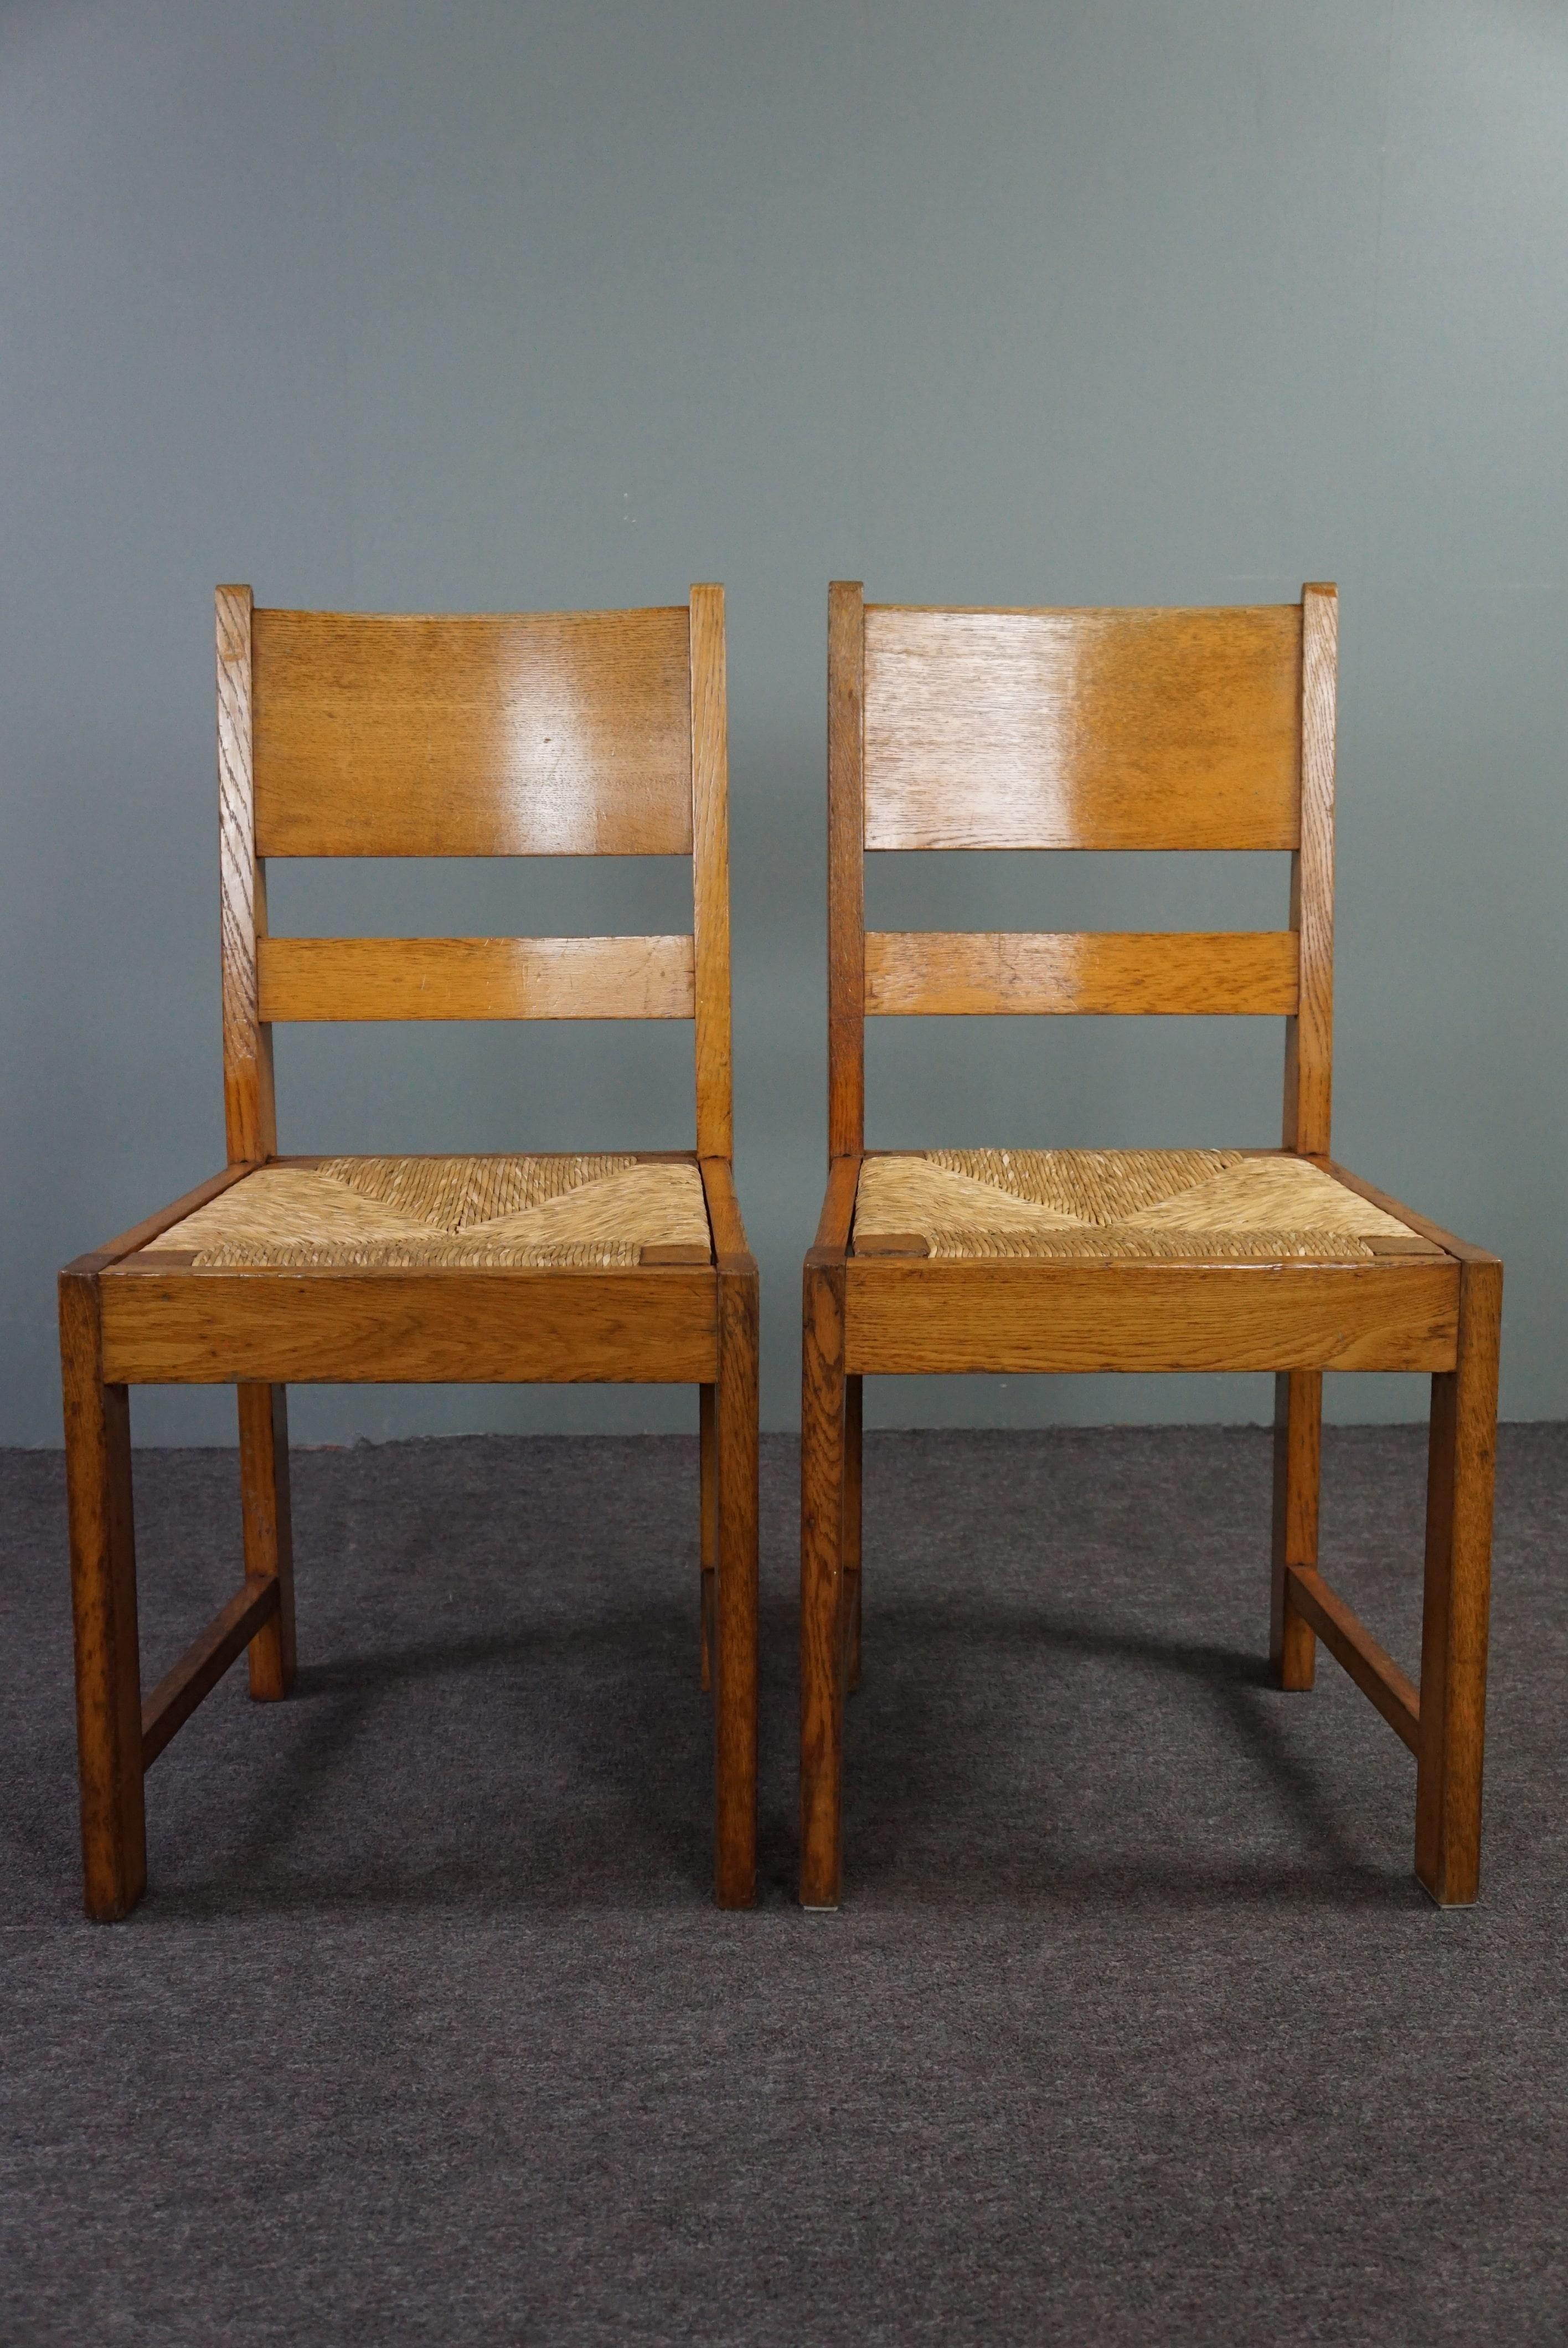 Hand-Crafted Set of 4 The Hague School dining room chairs For Sale